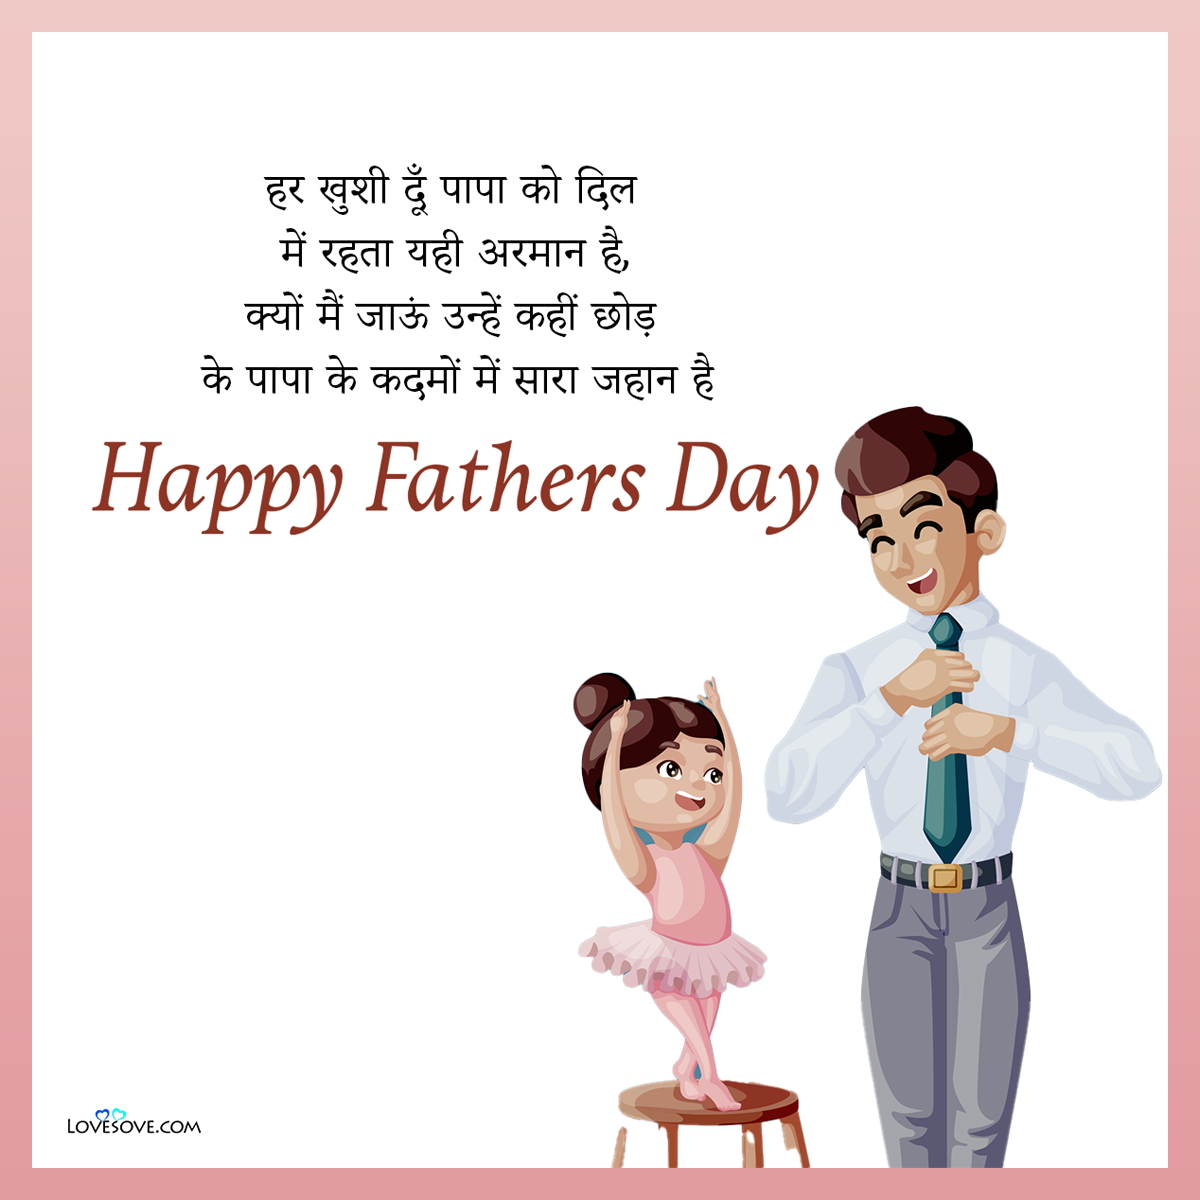 happy father day shayari, some lines for father's day in hindi